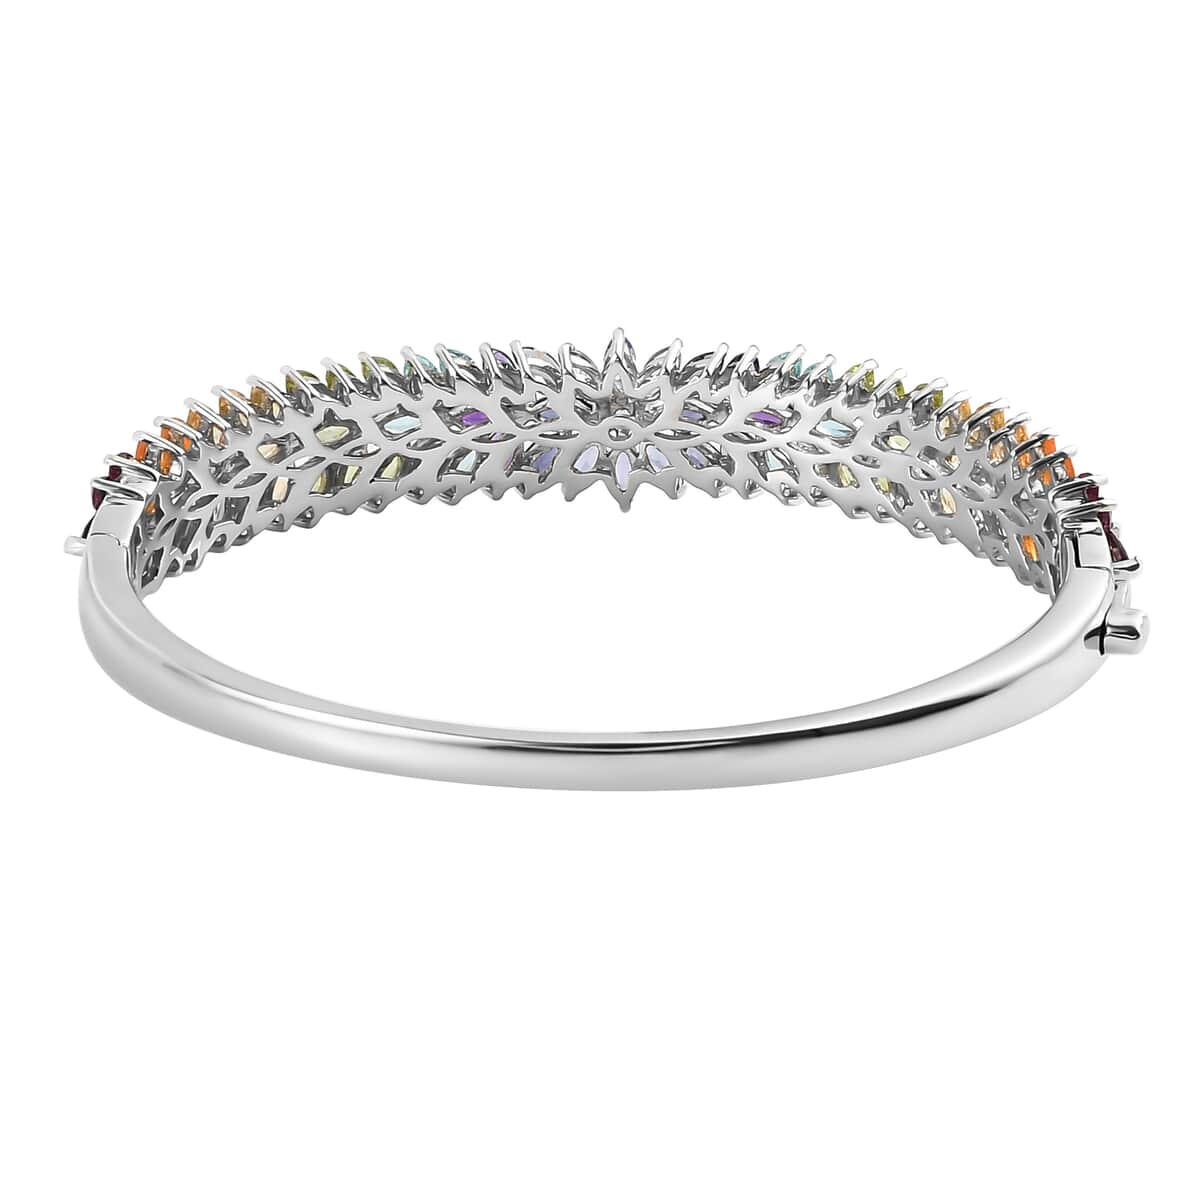 Floral Spray Multi-gemstone Bangle Bracelet For Women in Platinum Plated Sterling Silver with Push Clasp 7.5 Inches image number 3